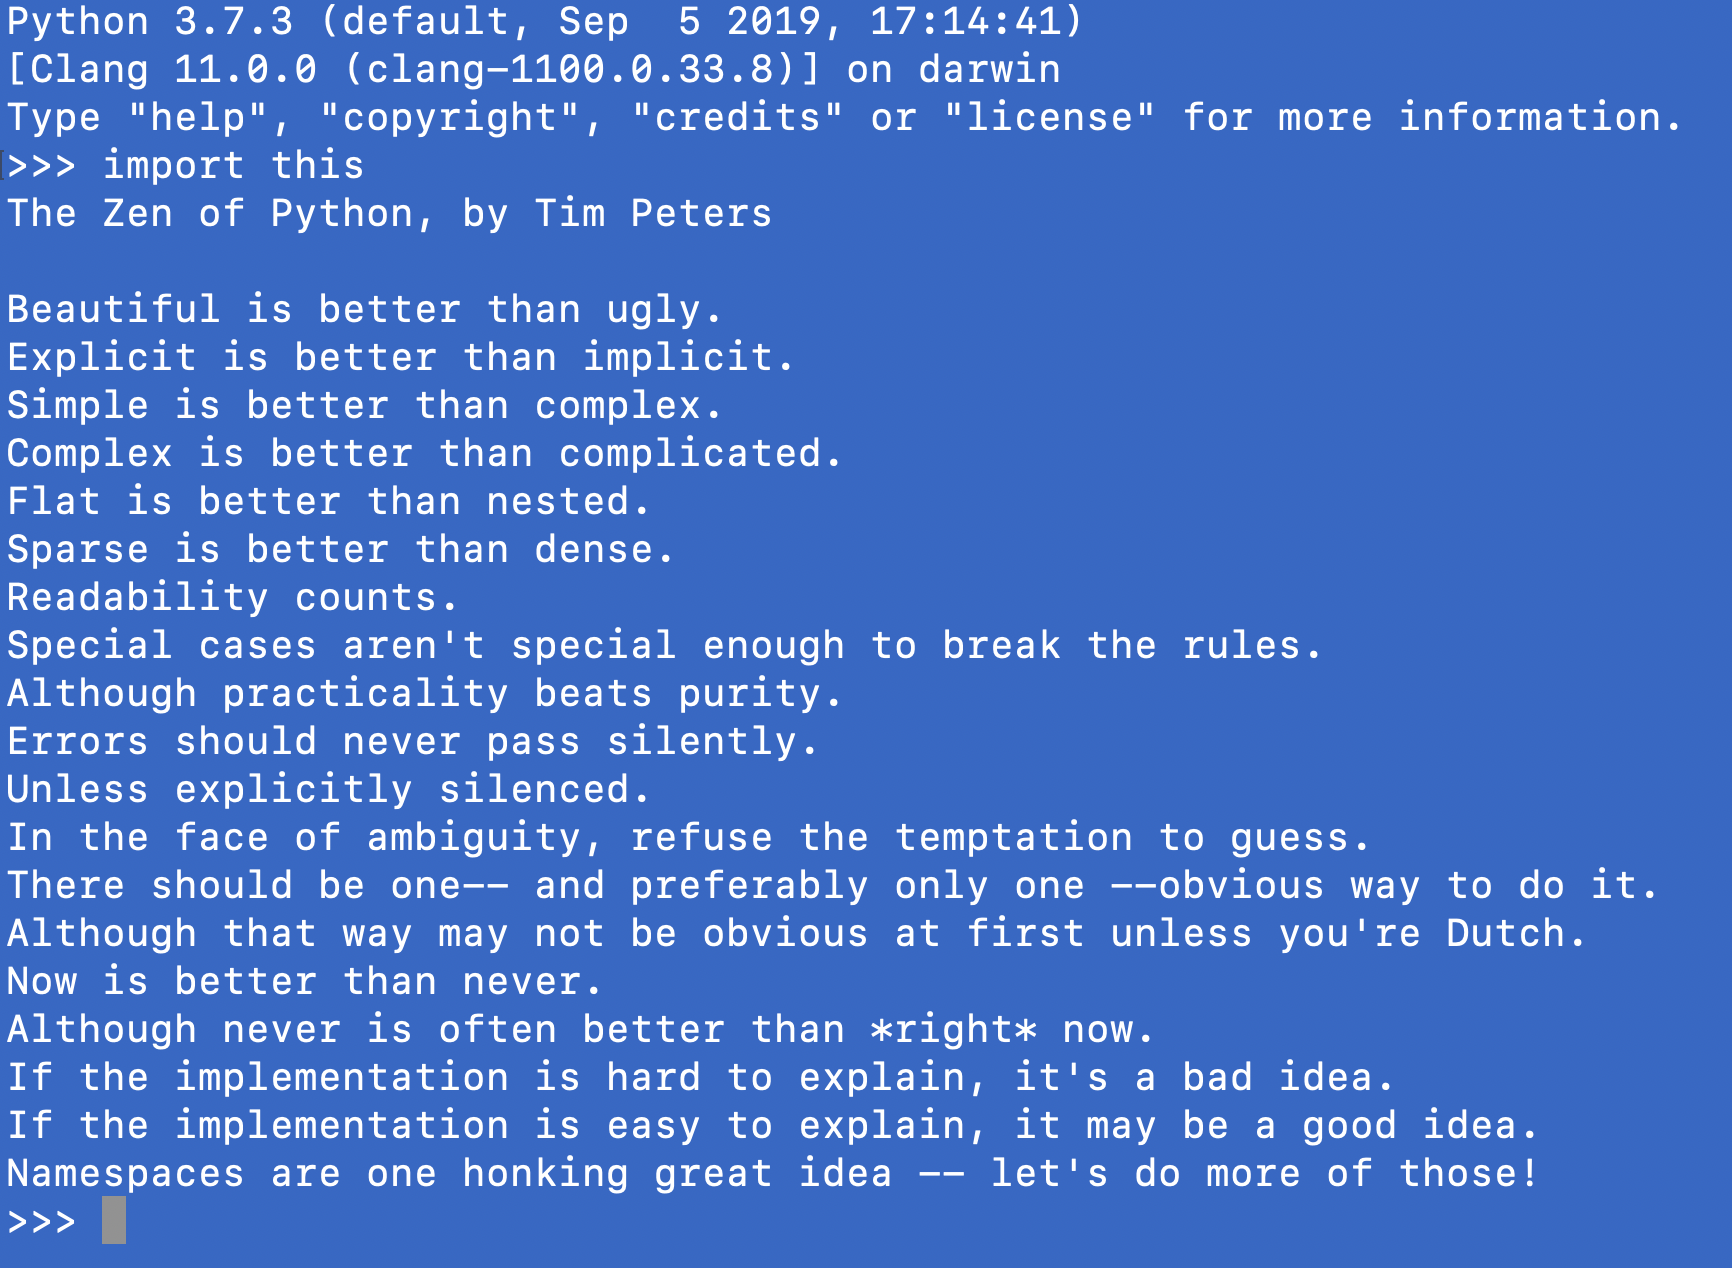 The Zen of Python, by Tim Peters. Beautiful is better than ugly. Explicit is better than implicit. Simple is better than complex. Complex is better than complicated. Flat is better than nested. Sparse is better than dense. Readability counts. Special cases aren't special enough to break the rules. Although practicality beats purity. Errors should never pass silently. Unless explicitly silenced. In the face of ambiguity, refuse the temptation to guess. There should be one-- and preferably only one --obvious way to do it. Although that way may not be obvious at first unless you're Dutch. Now is better than never. Although never is often better than *right* now. If the implementation is hard to explain, it's a bad idea. If the implementation is easy to explain, it may be a good idea. Namespaces are one honking great idea -- let's do more of those!